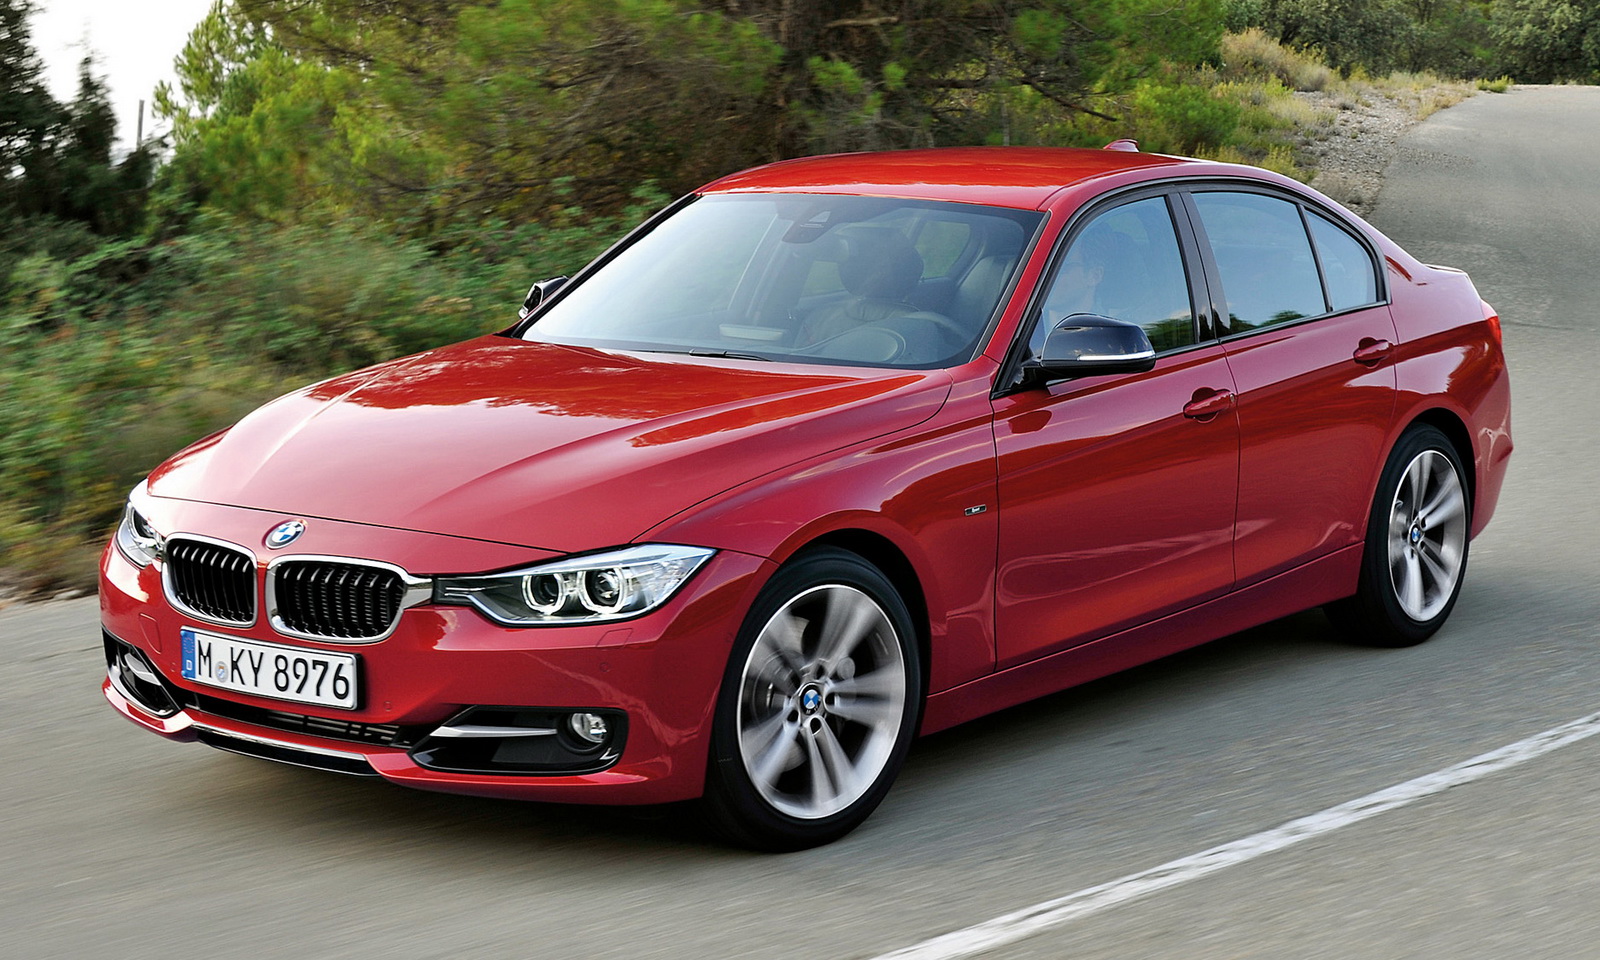 How Much Has The Facelift Changed The BMW 3 Series?